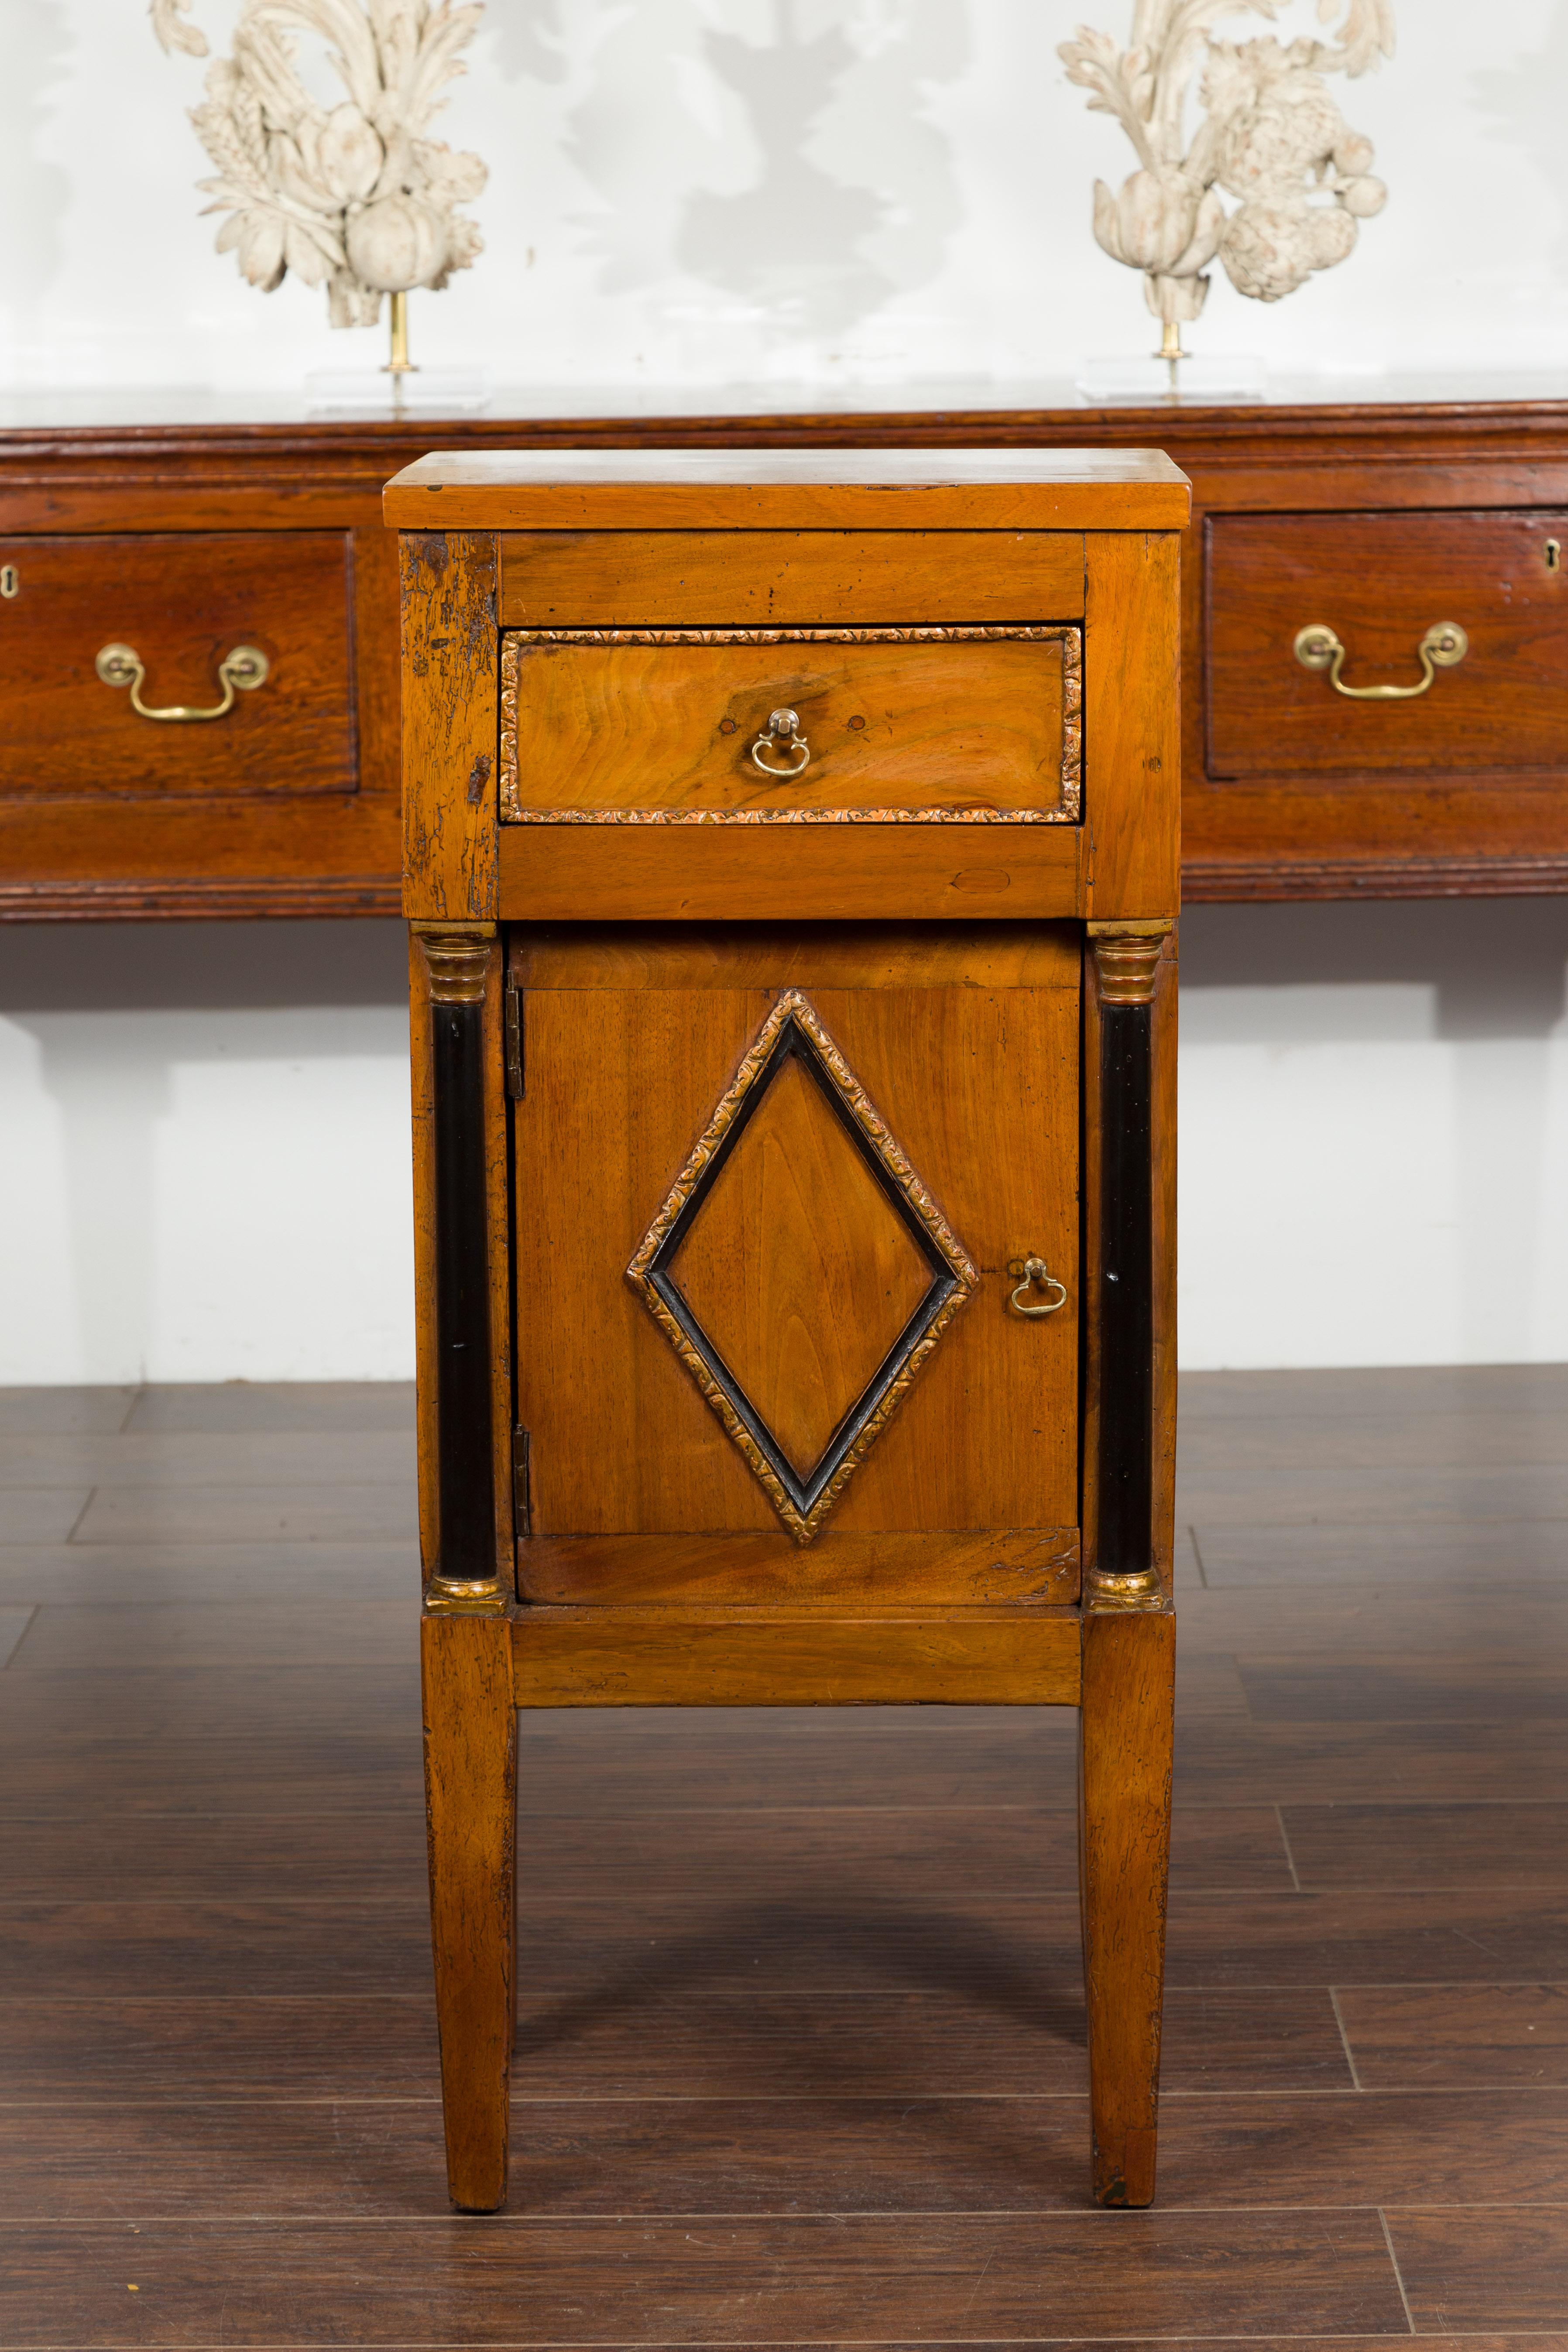 An Italian Empire period walnut cabinet from the early 19th century, with black and gold accents and diamond motifs. Created in Italy during the early years of the 19th century, this Empire cabinet features a rectangular top sitting above a single